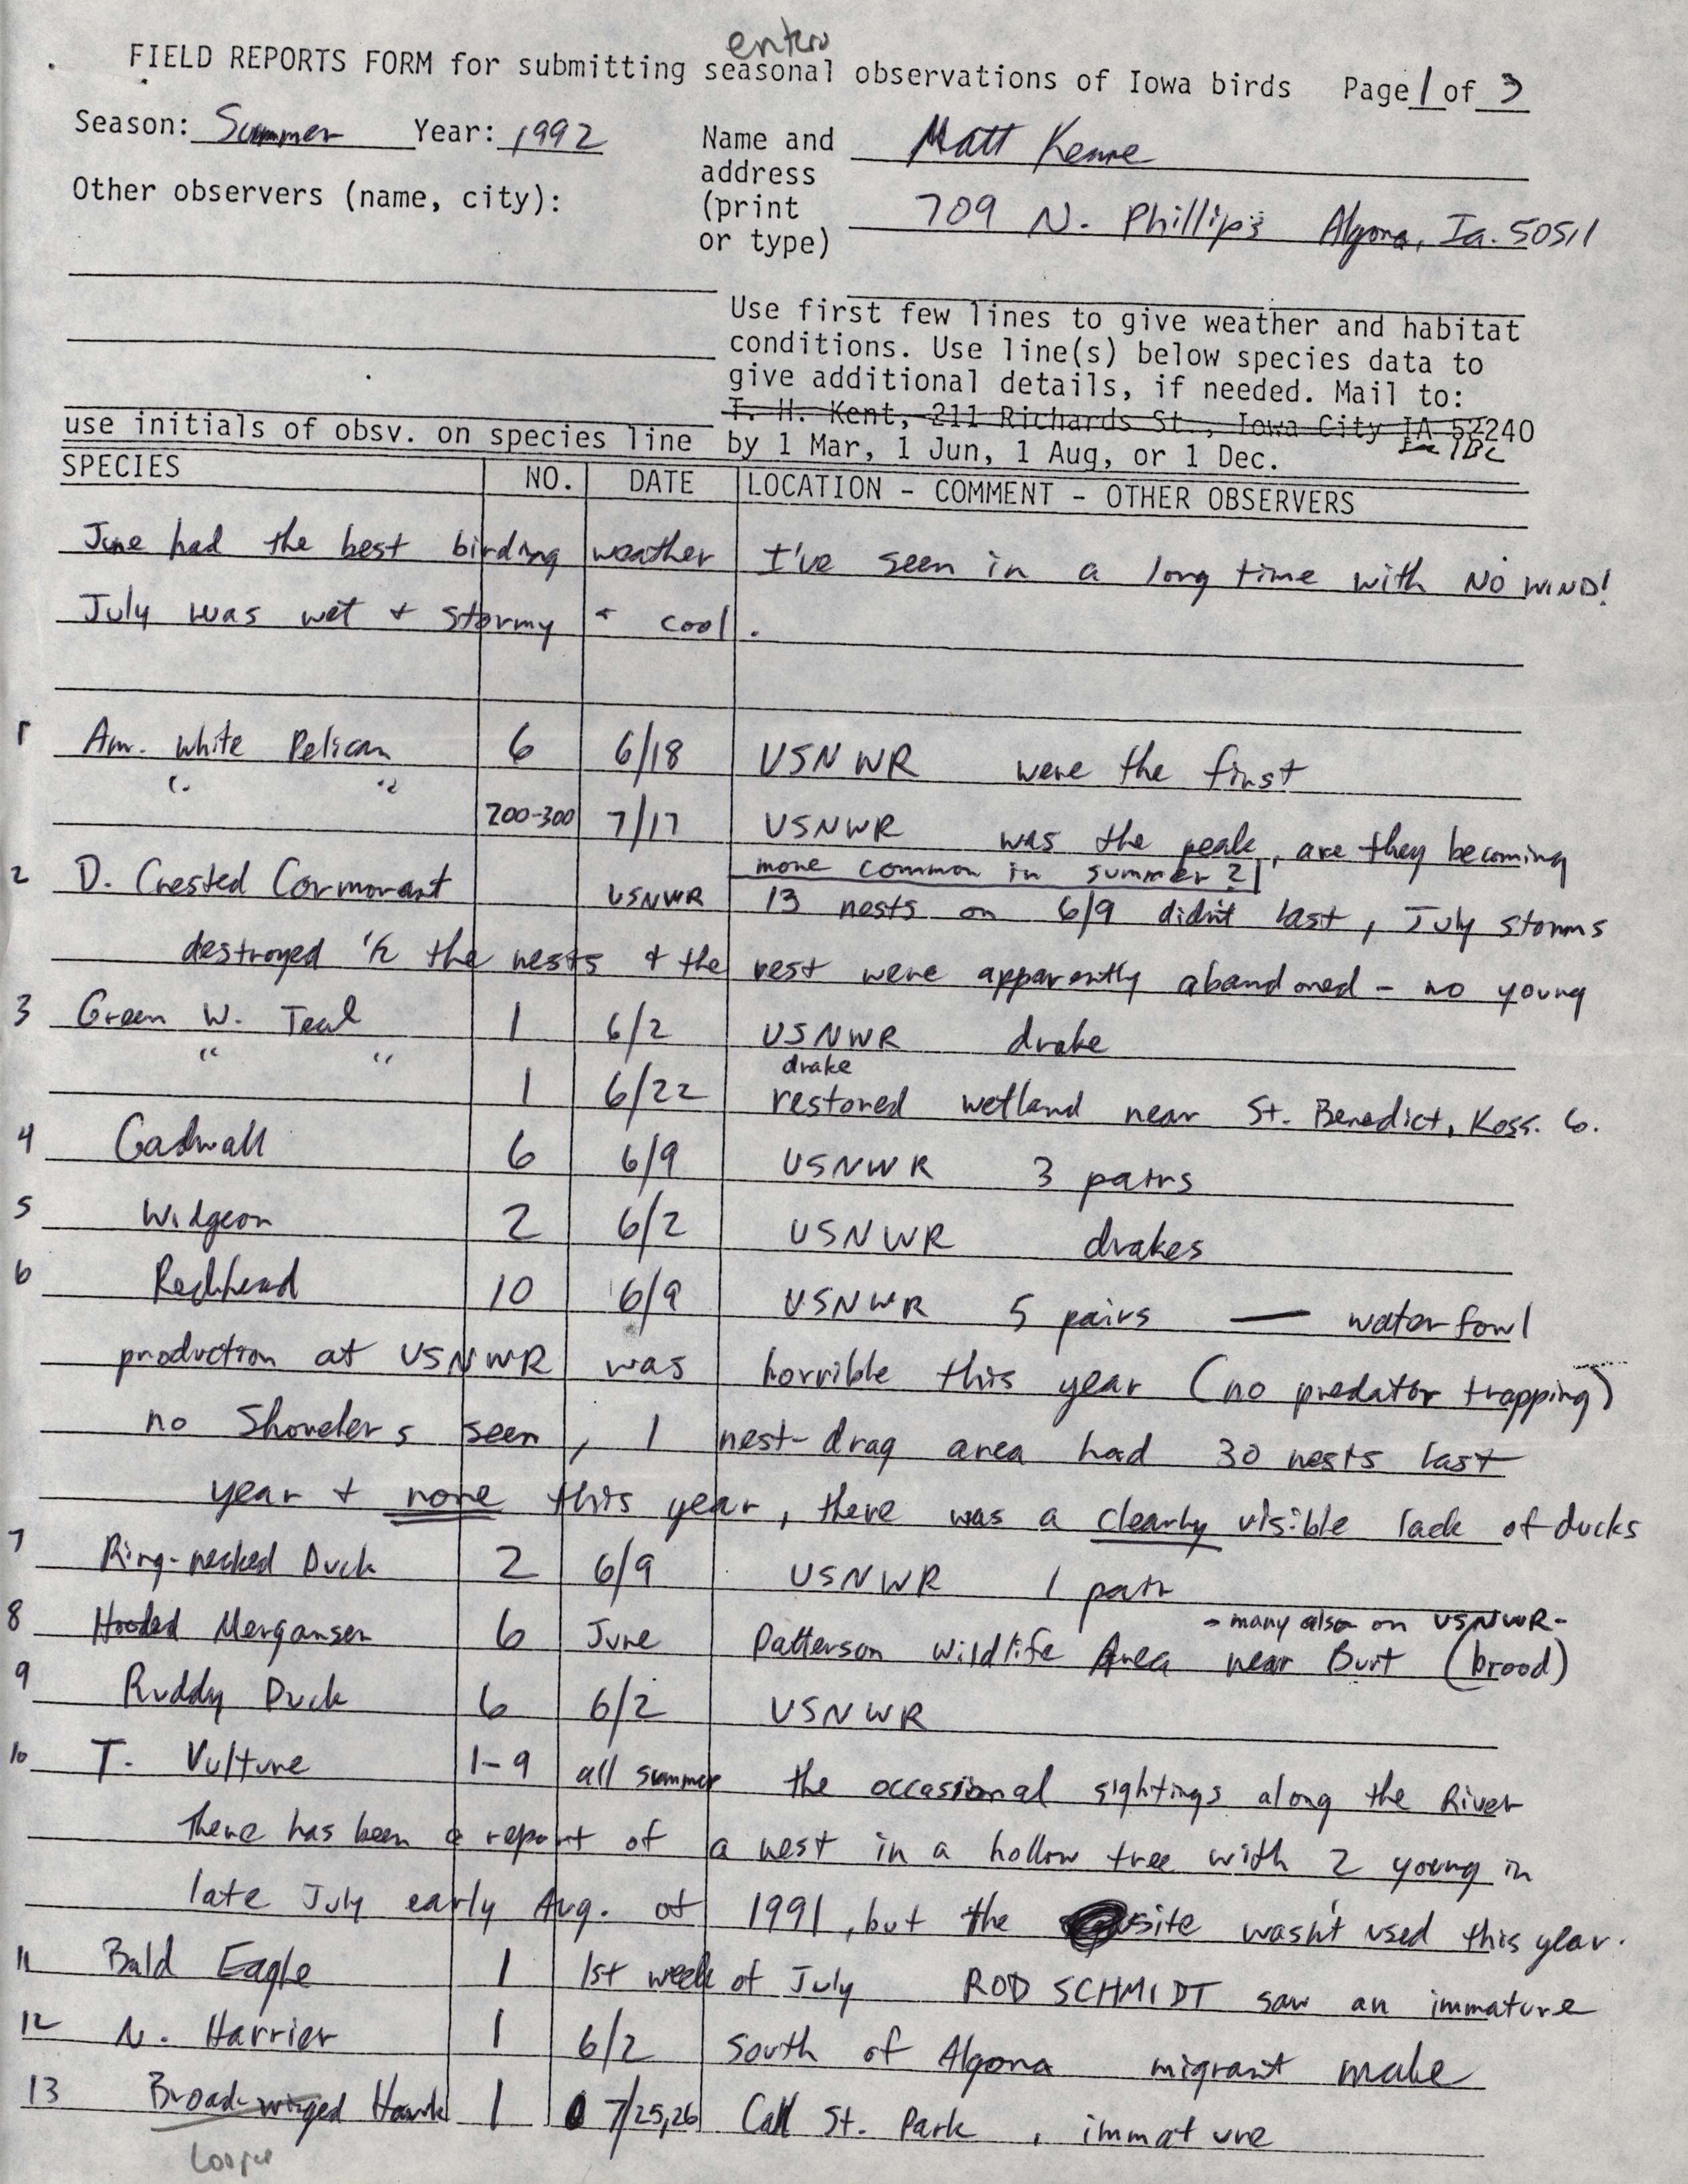 Field reports form for submitting seasonal observations of Iowa birds, Matthew Kenne, summer 1992